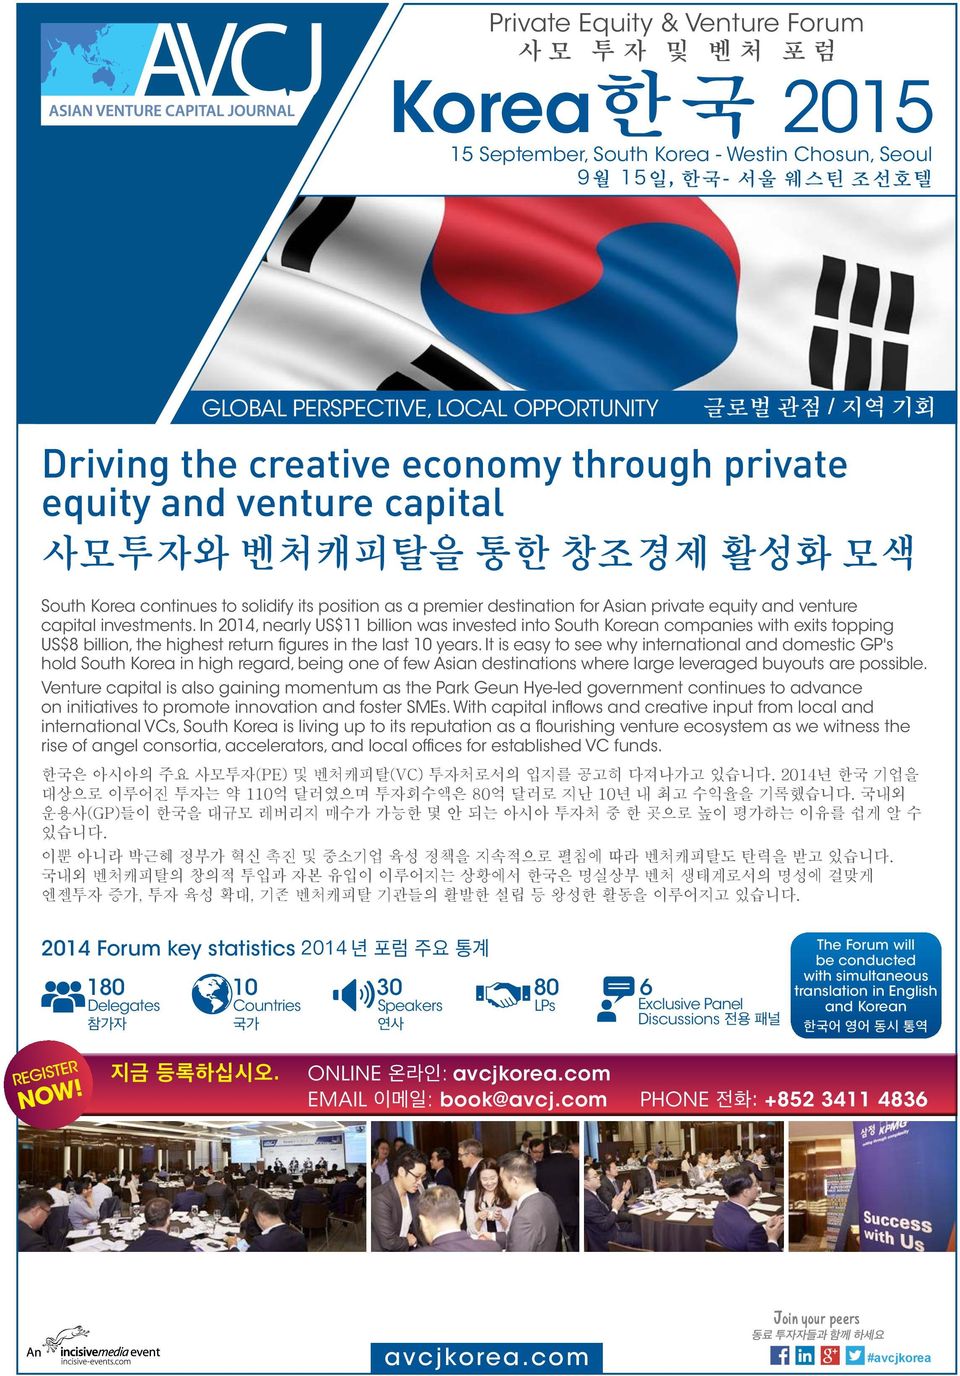 capital investments. In 2014, nearly US$11 billion was invested into South Korean companies with exits topping US$8 billion, the highest return figures in the last 10 years.